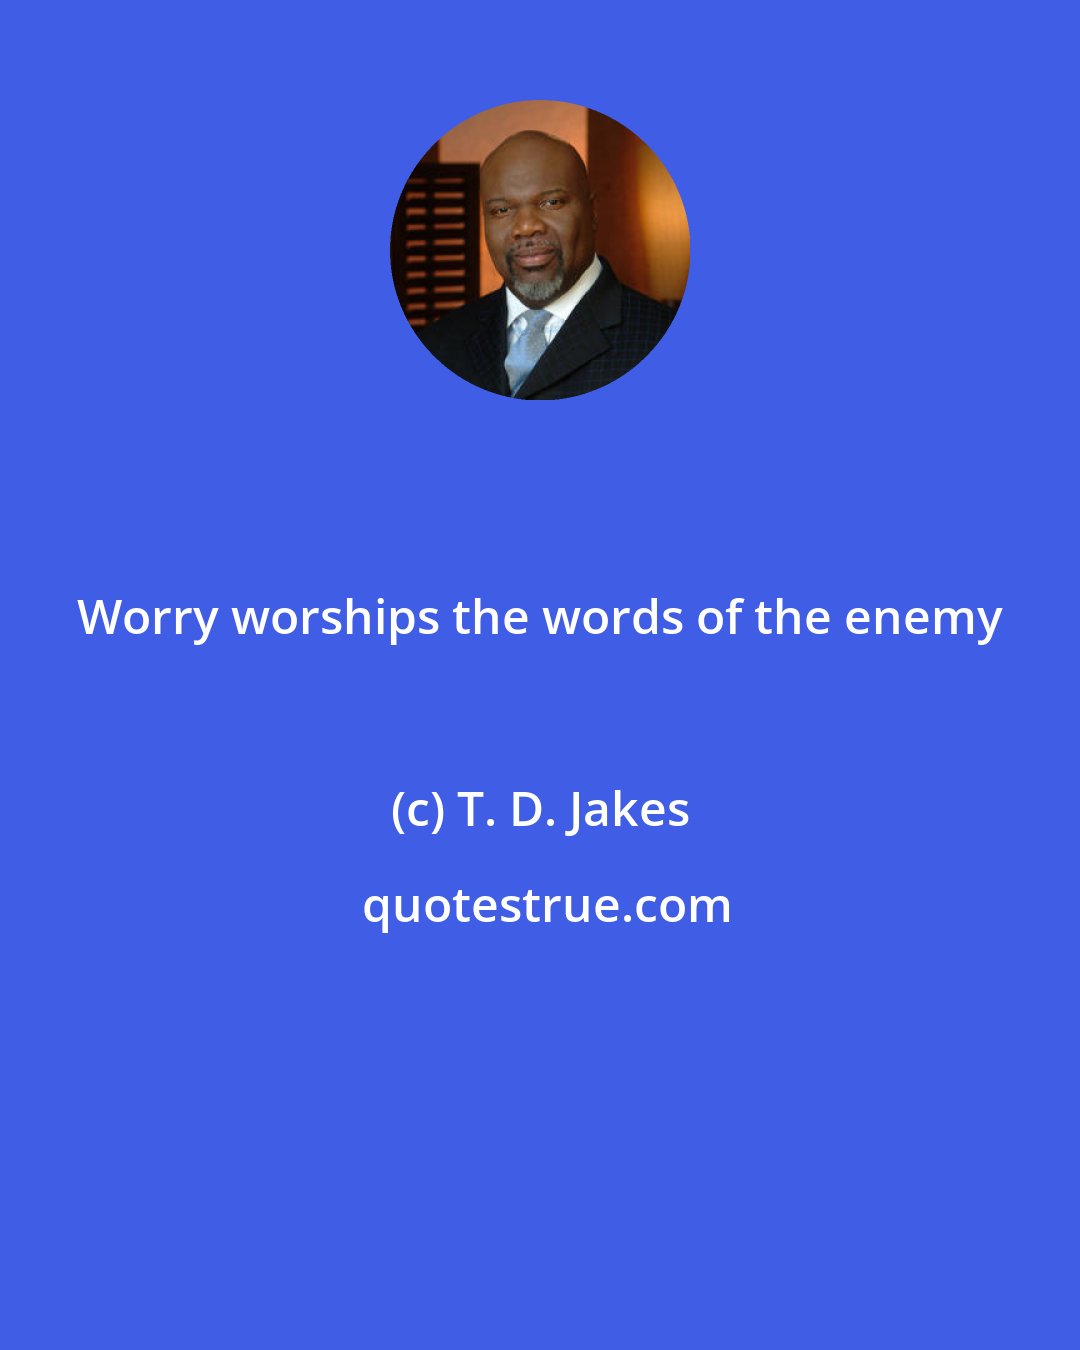 T. D. Jakes: Worry worships the words of the enemy